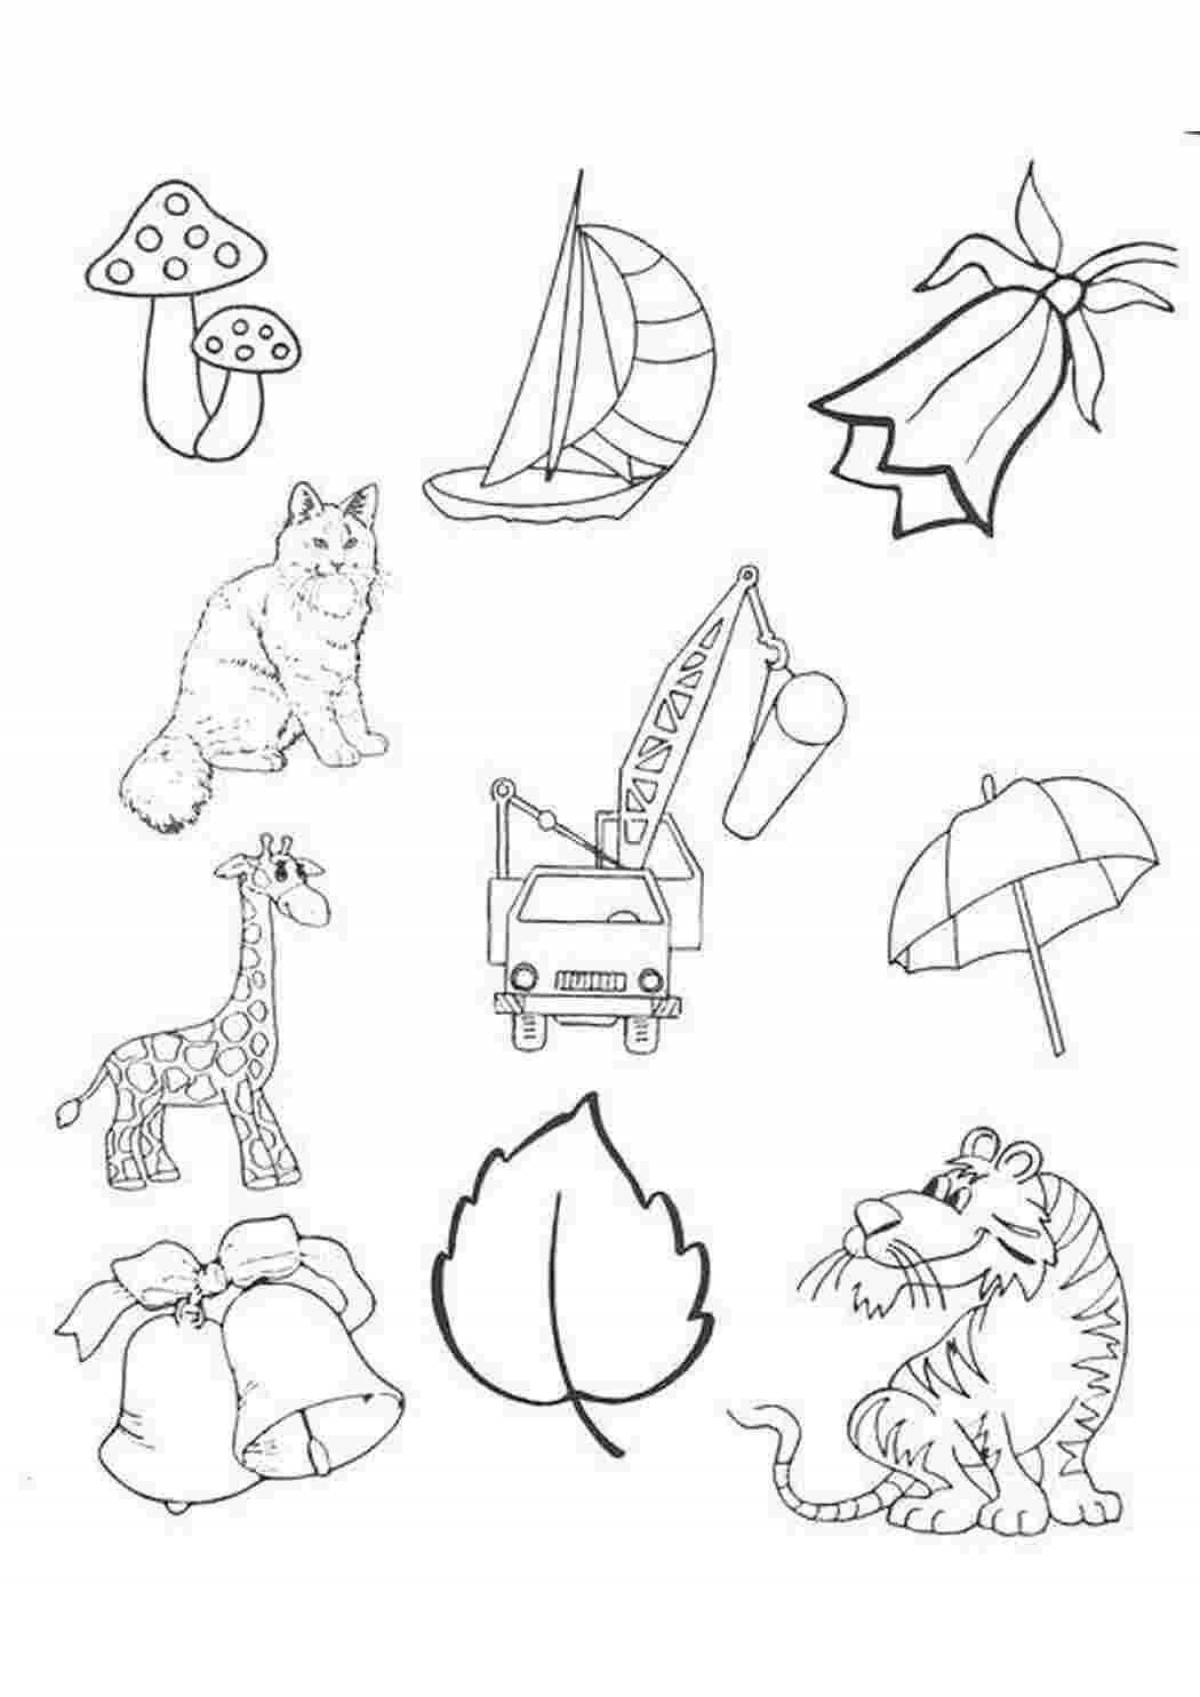 Beautiful inanimate nature coloring page for kids